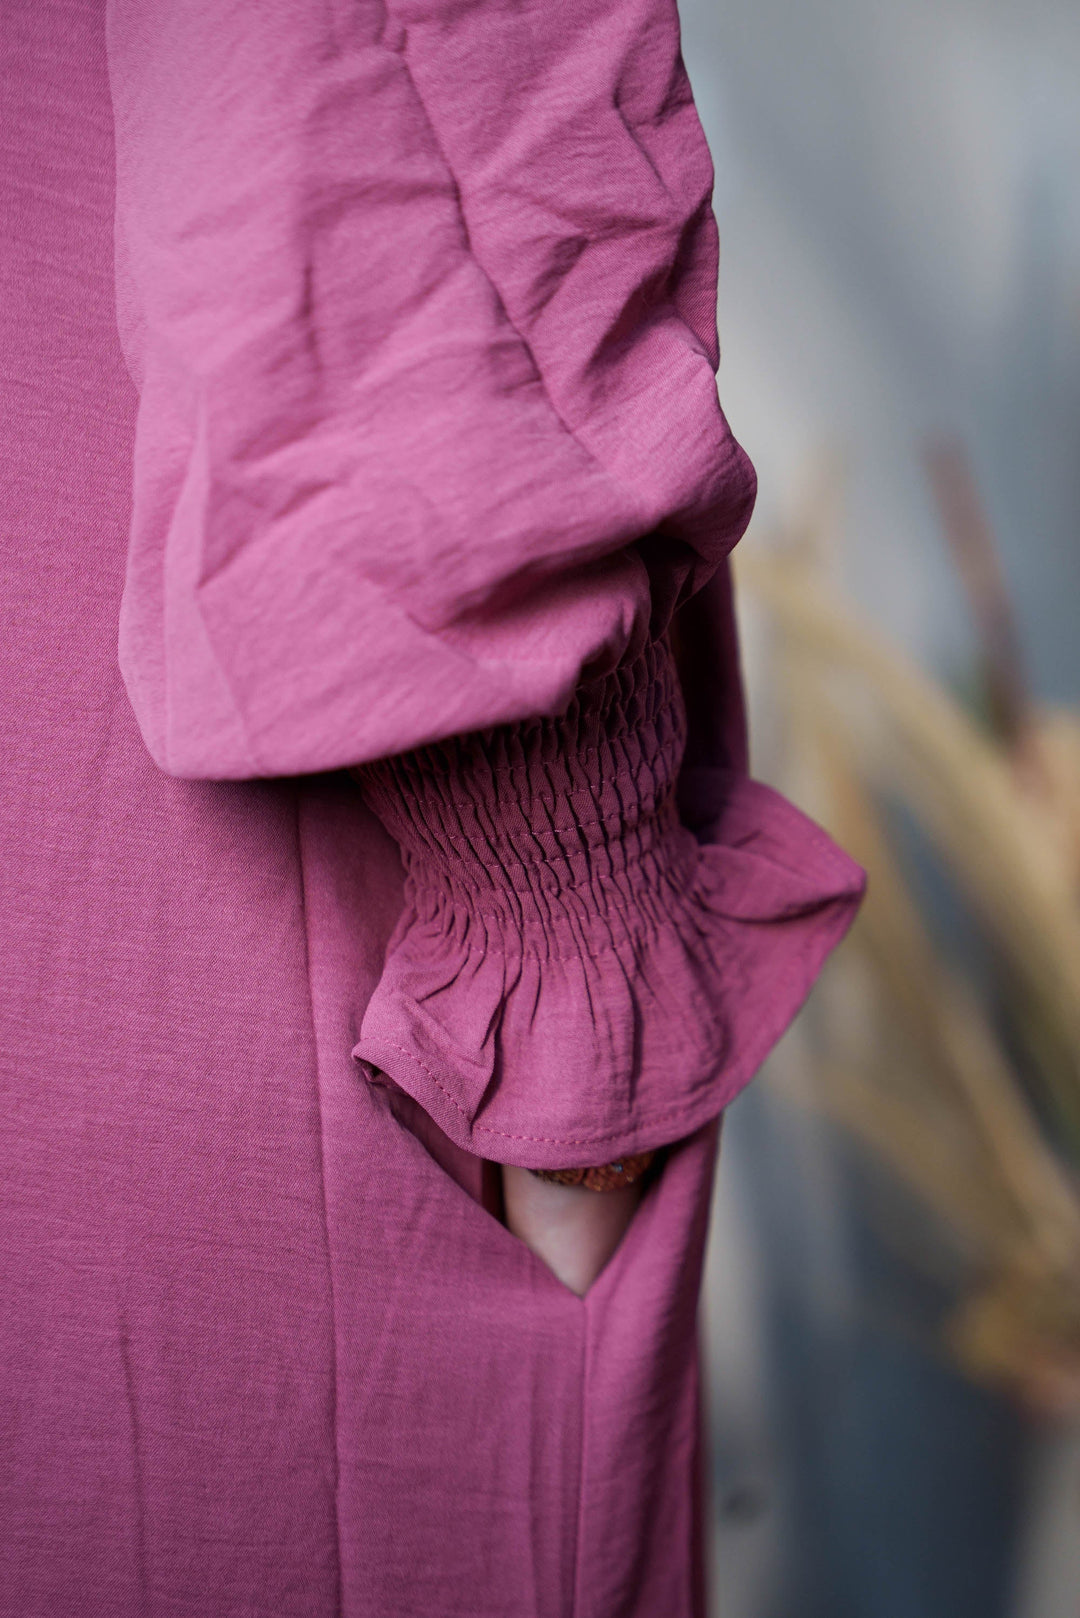 a close up of a person wearing a pink shirt